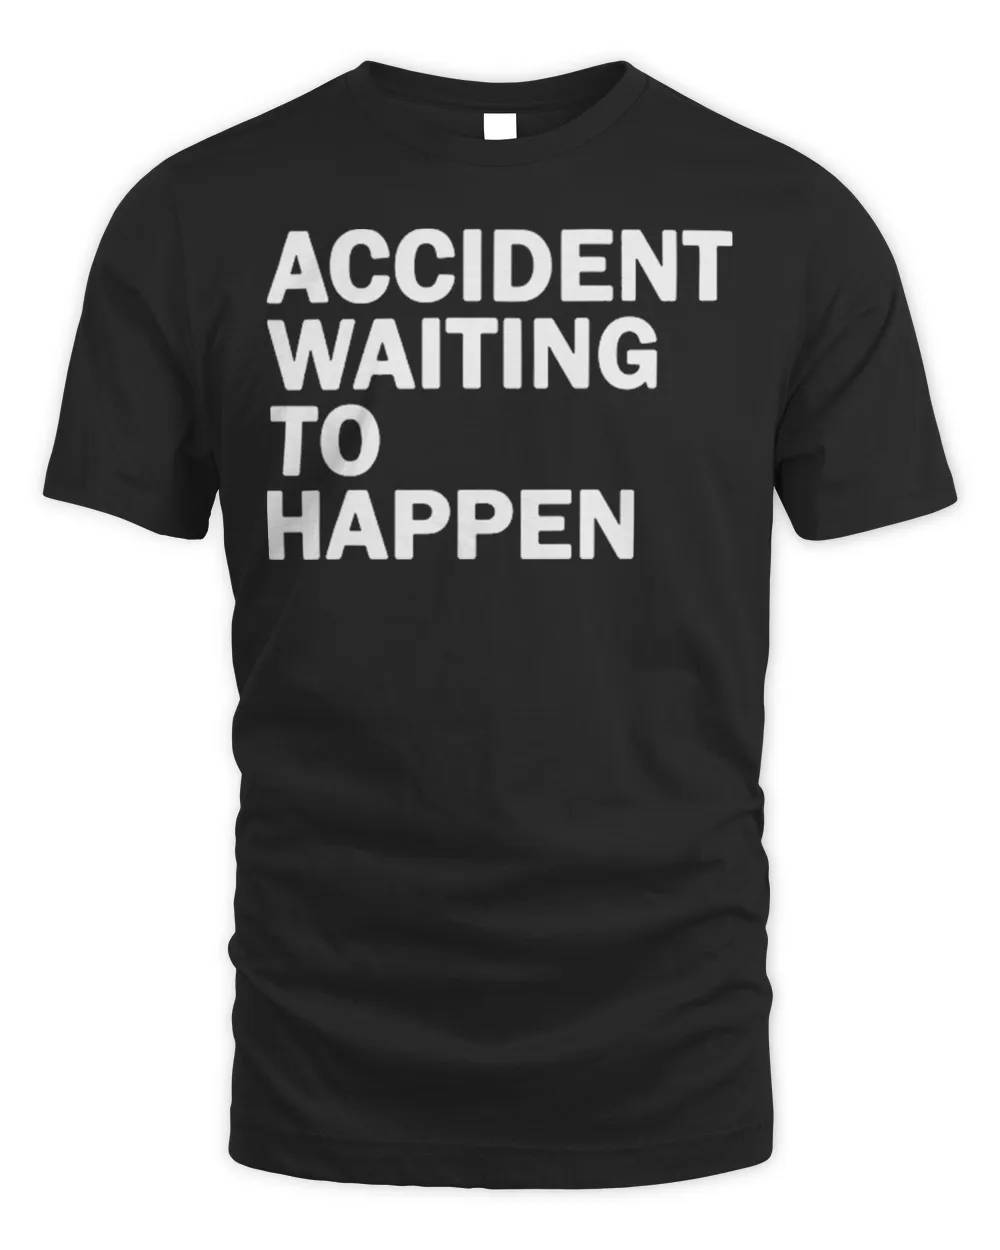 Accident waiting to happen T-Shirt